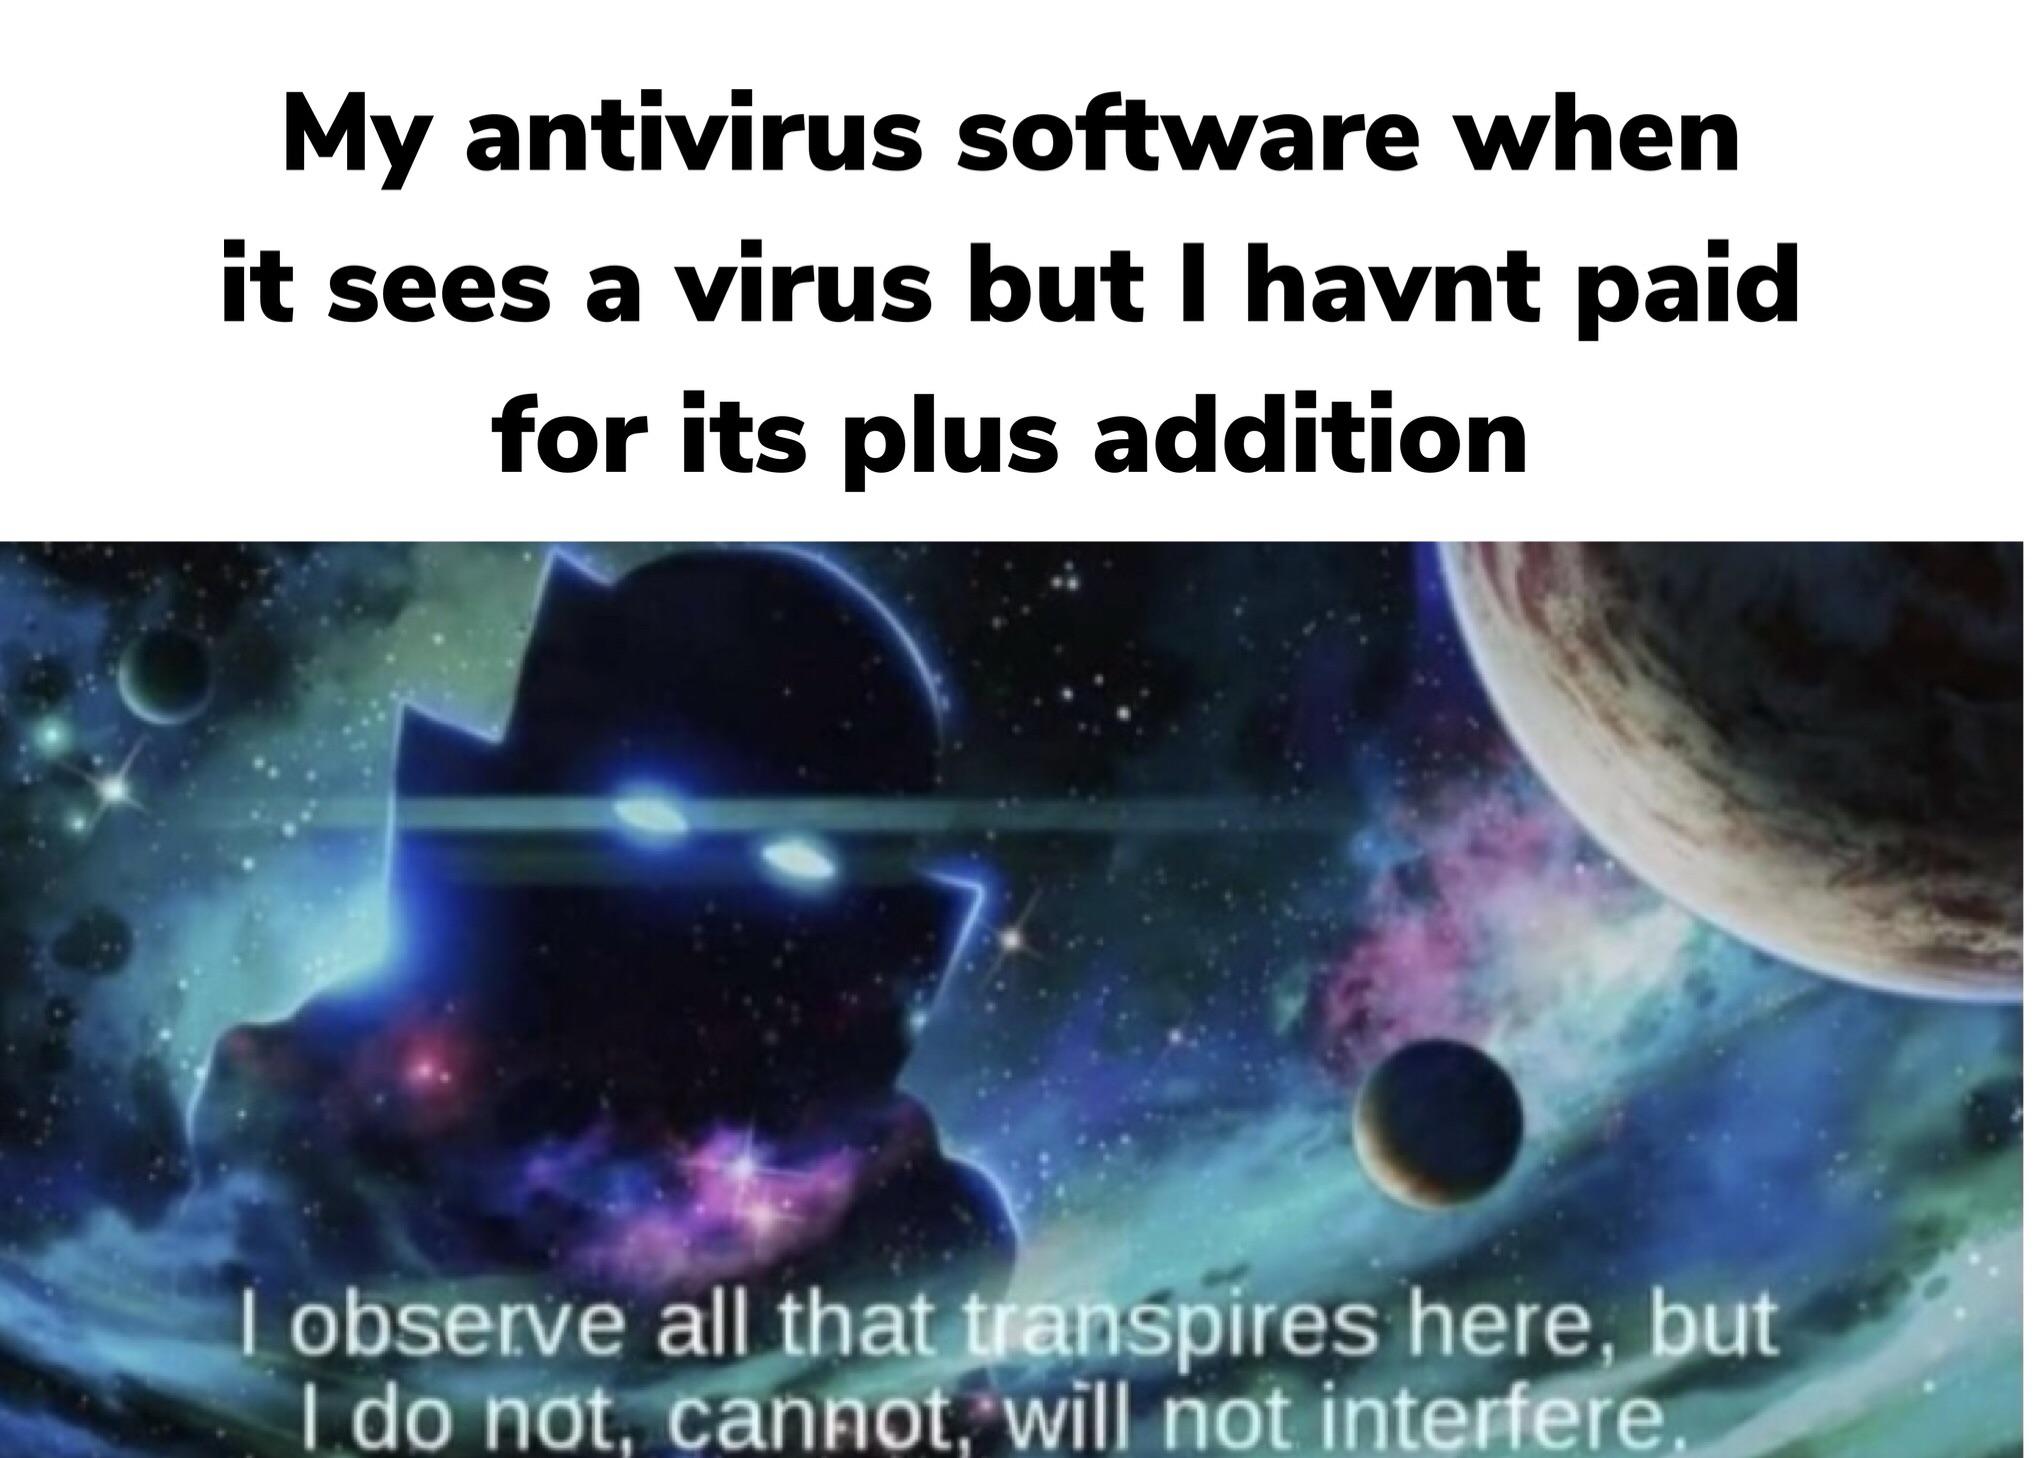 dank memes - watcher meme - My antivirus software when it sees a virus but I havnt paid for its plus addition a I observe all that transpires here, but I do not, cannot, will not interfere,